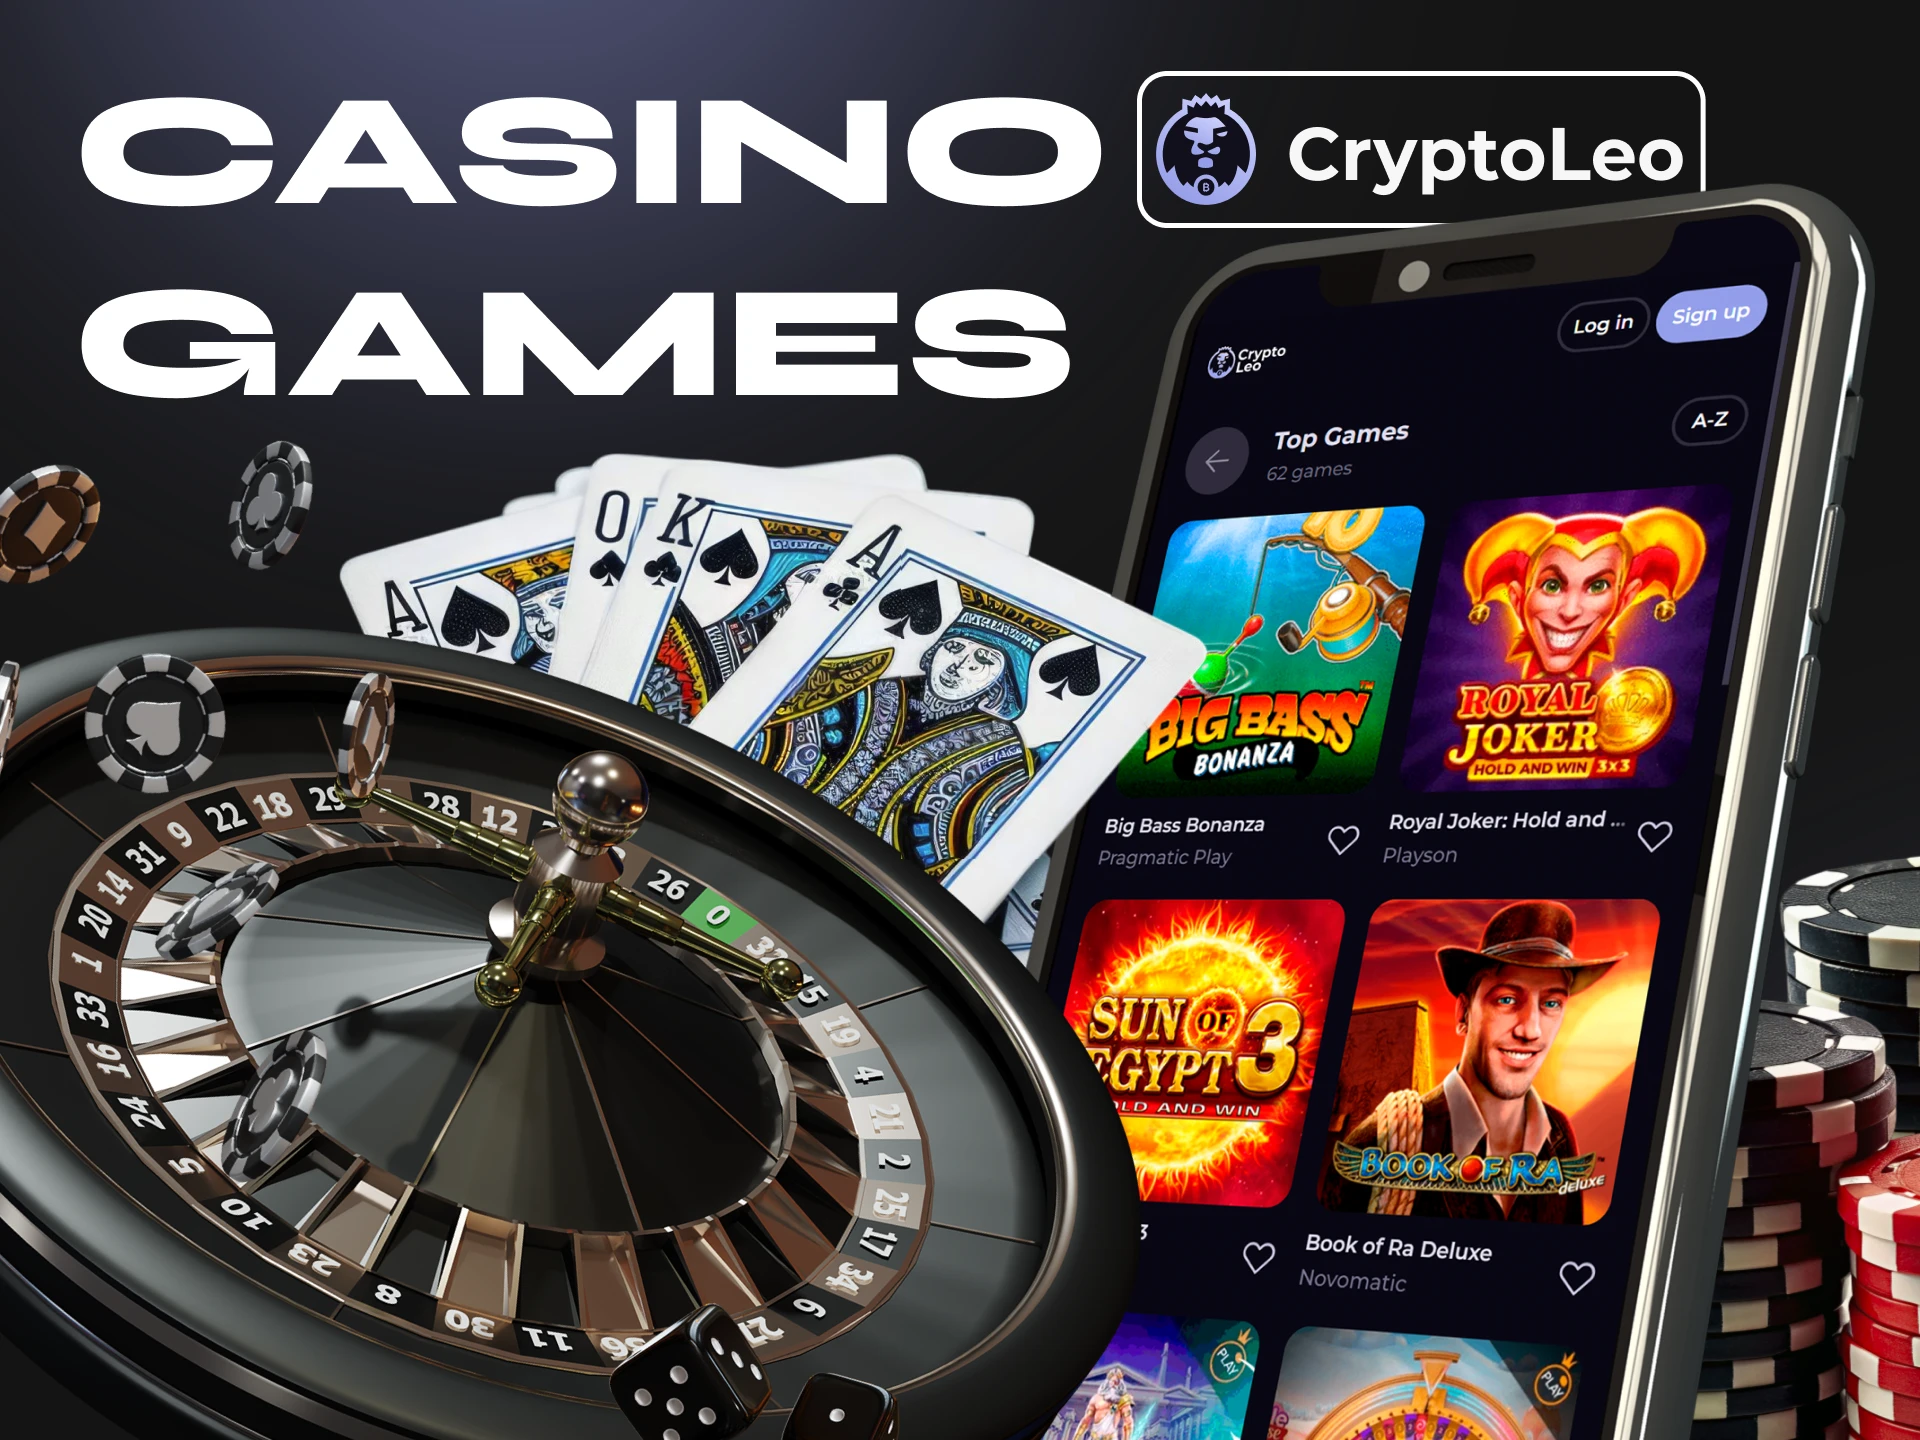 Play profitable casino games from your phone on Cryptoleo.